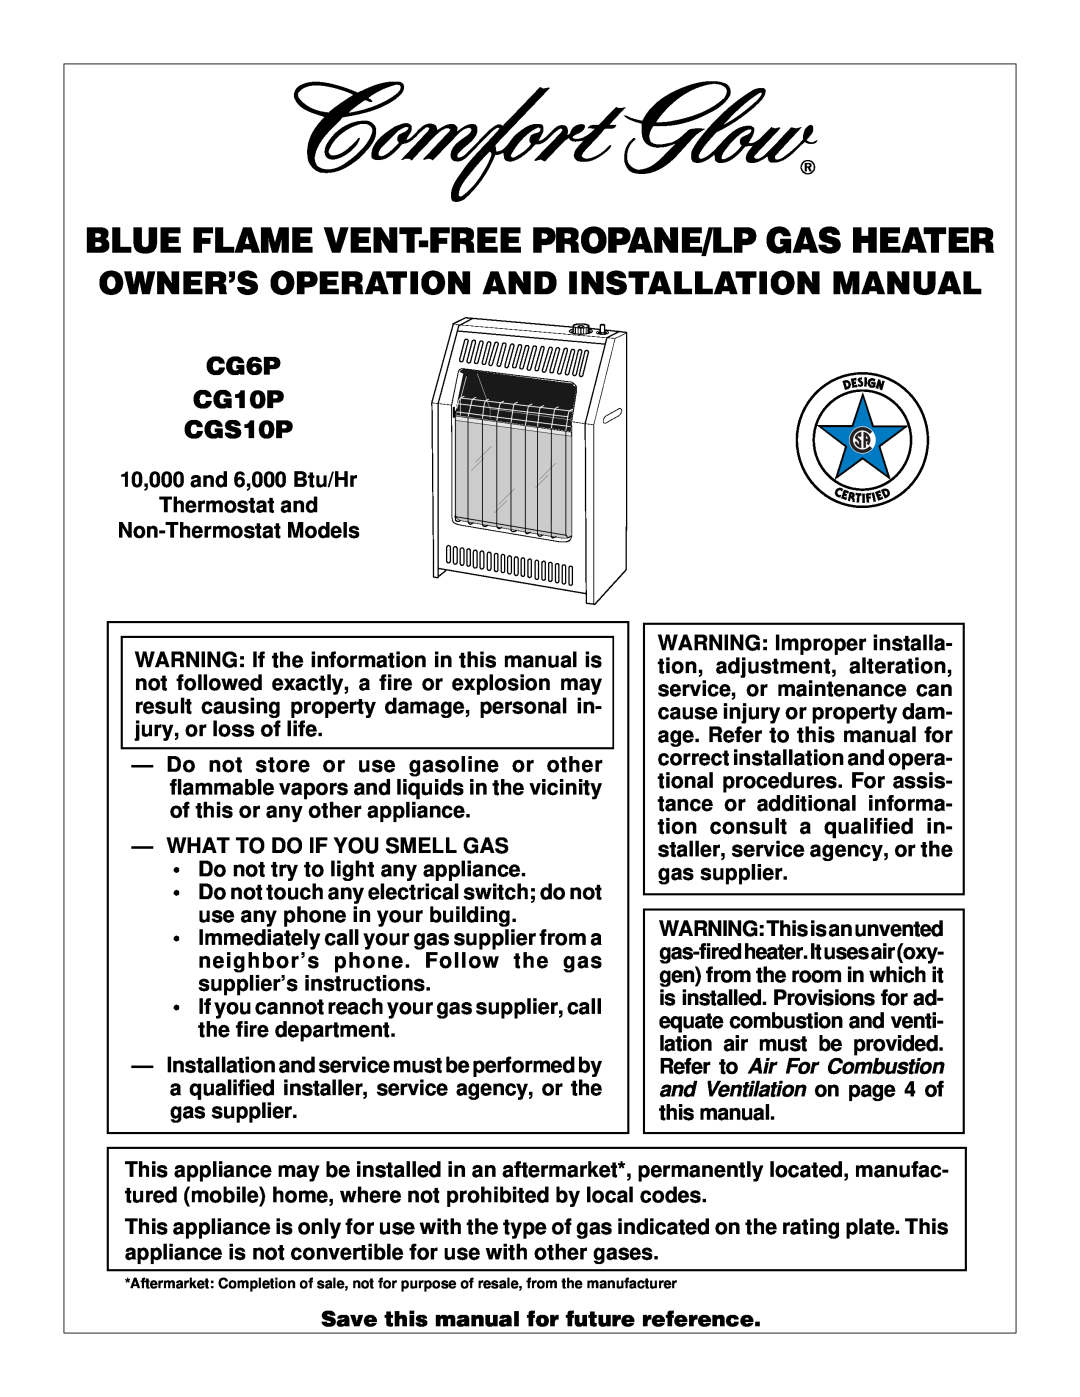 Desa CG6P, CGS10P installation manual Blue Flame Vent-Freepropane/Lp Gas Heater, Owner’S Operation And Installation Manual 